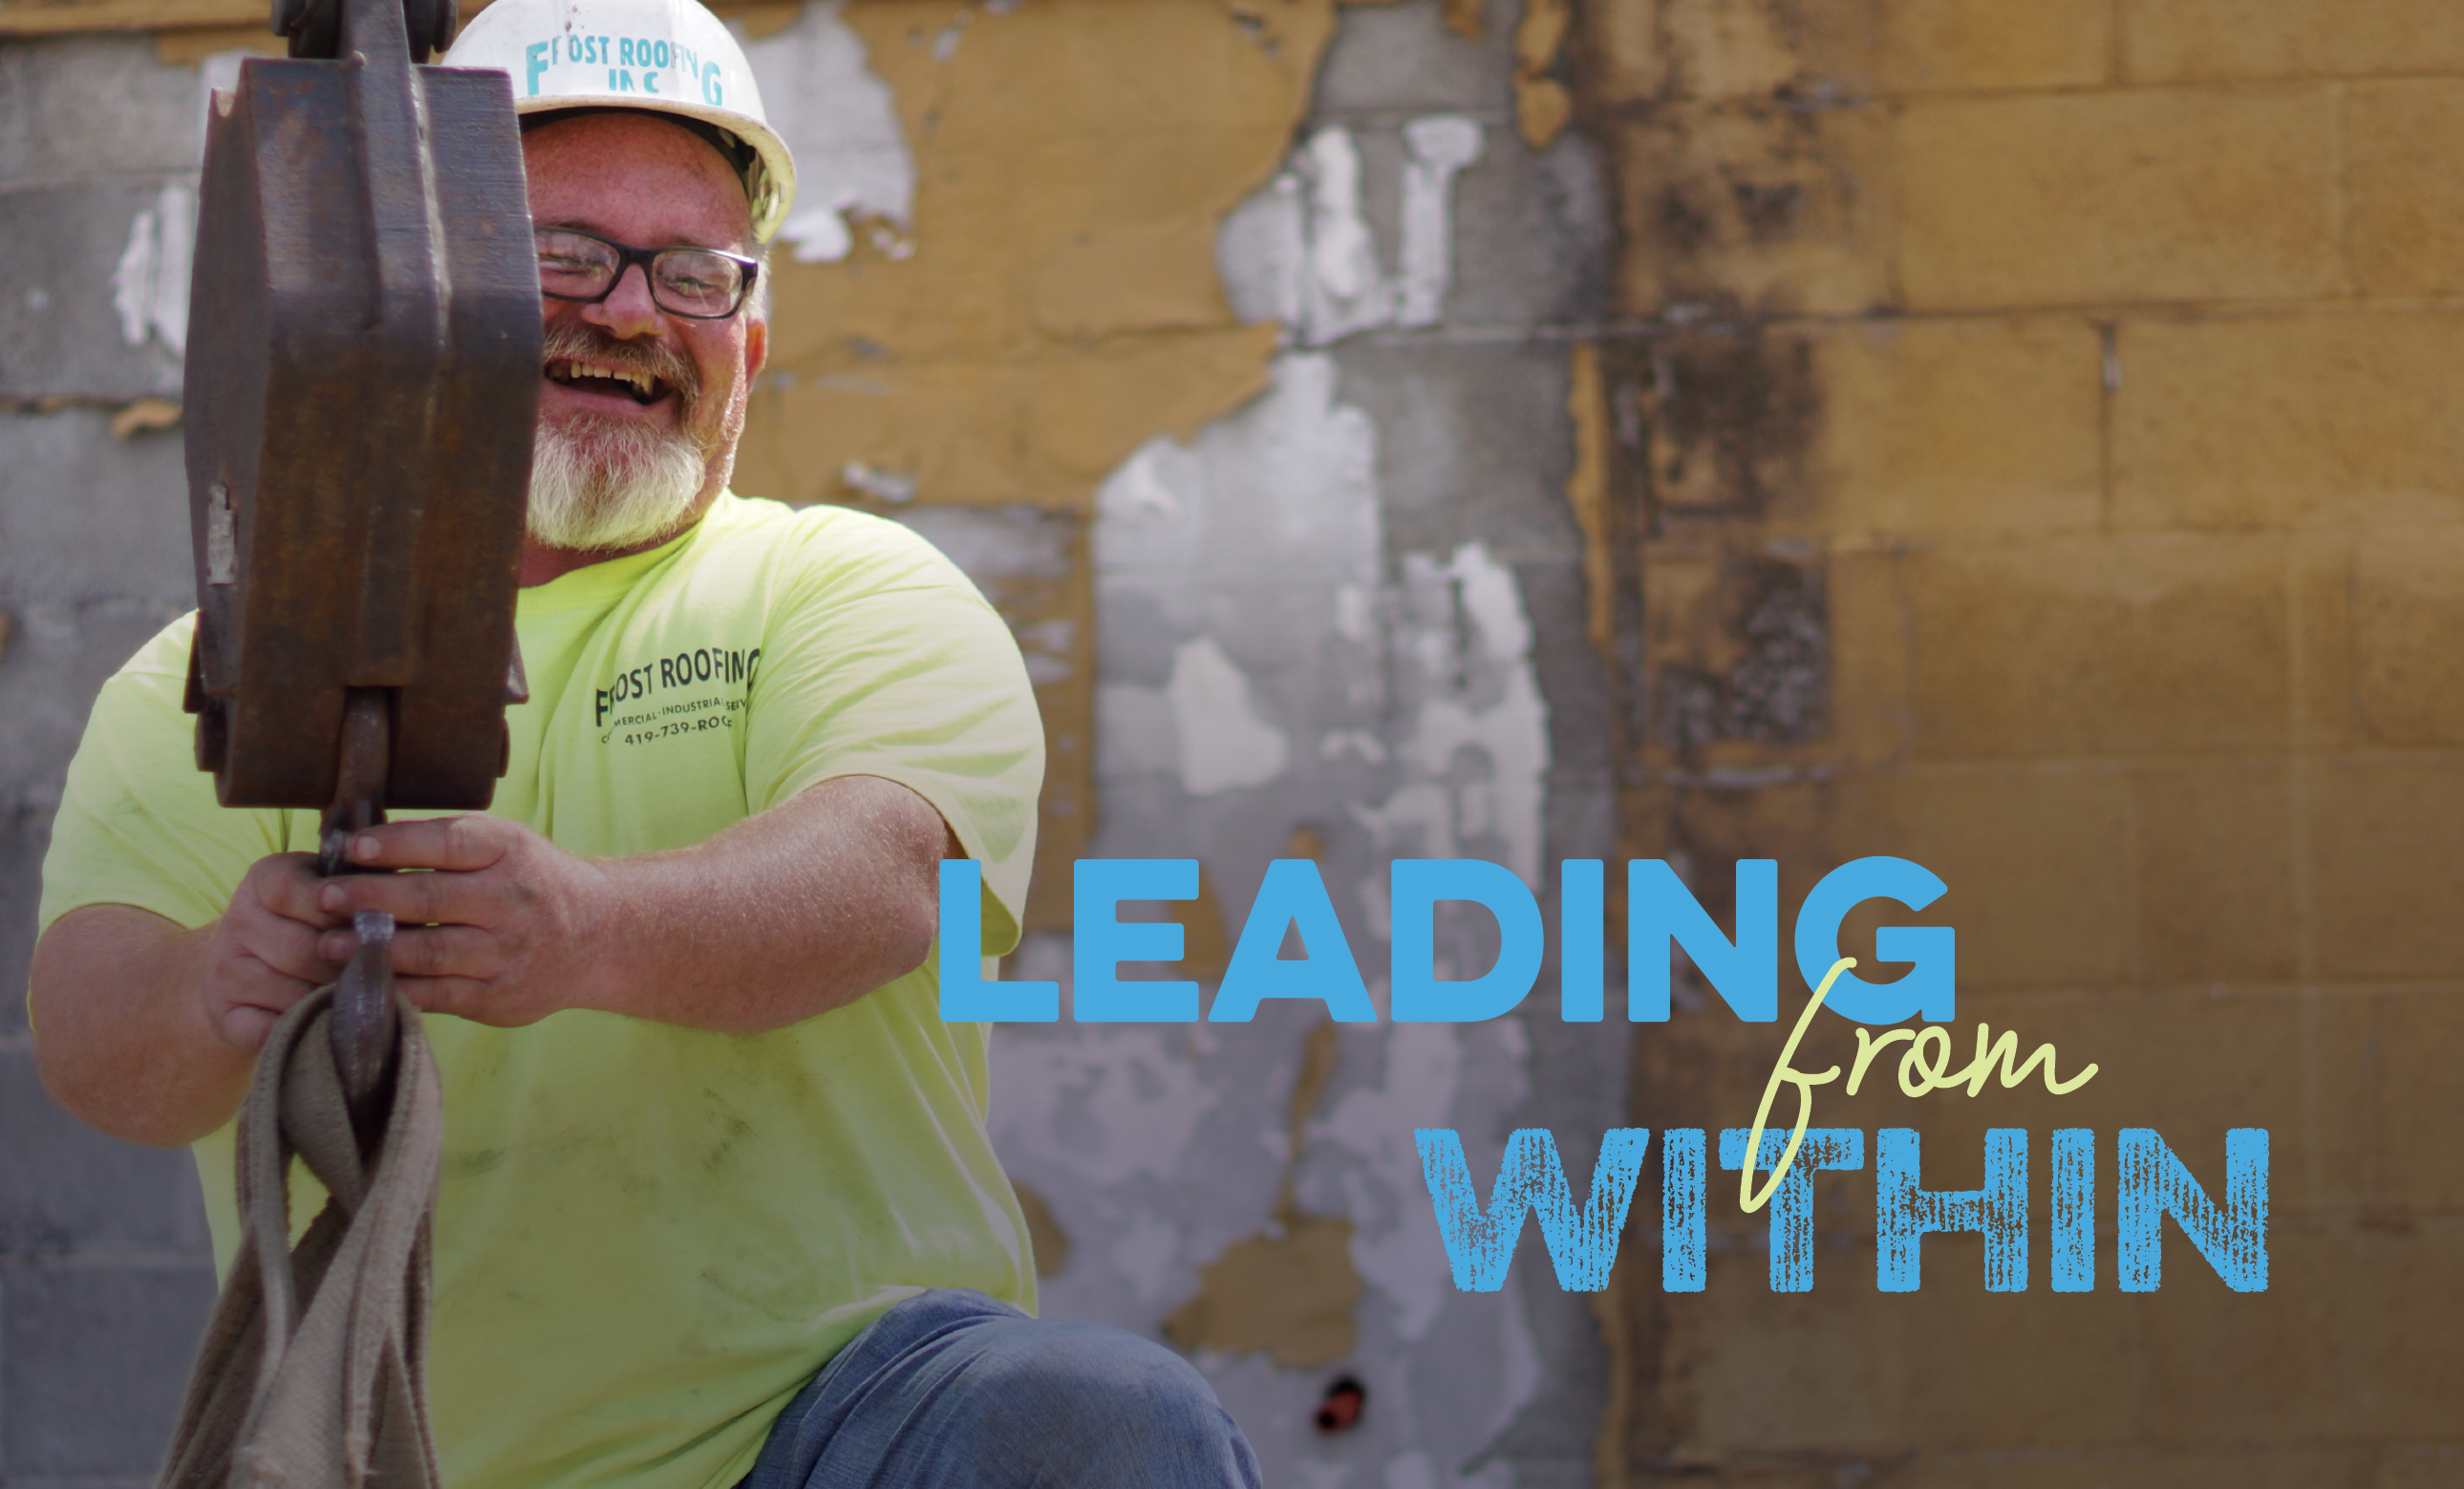 Leading from within - Todd Dunlap wins the prestigious Best of the Best Award